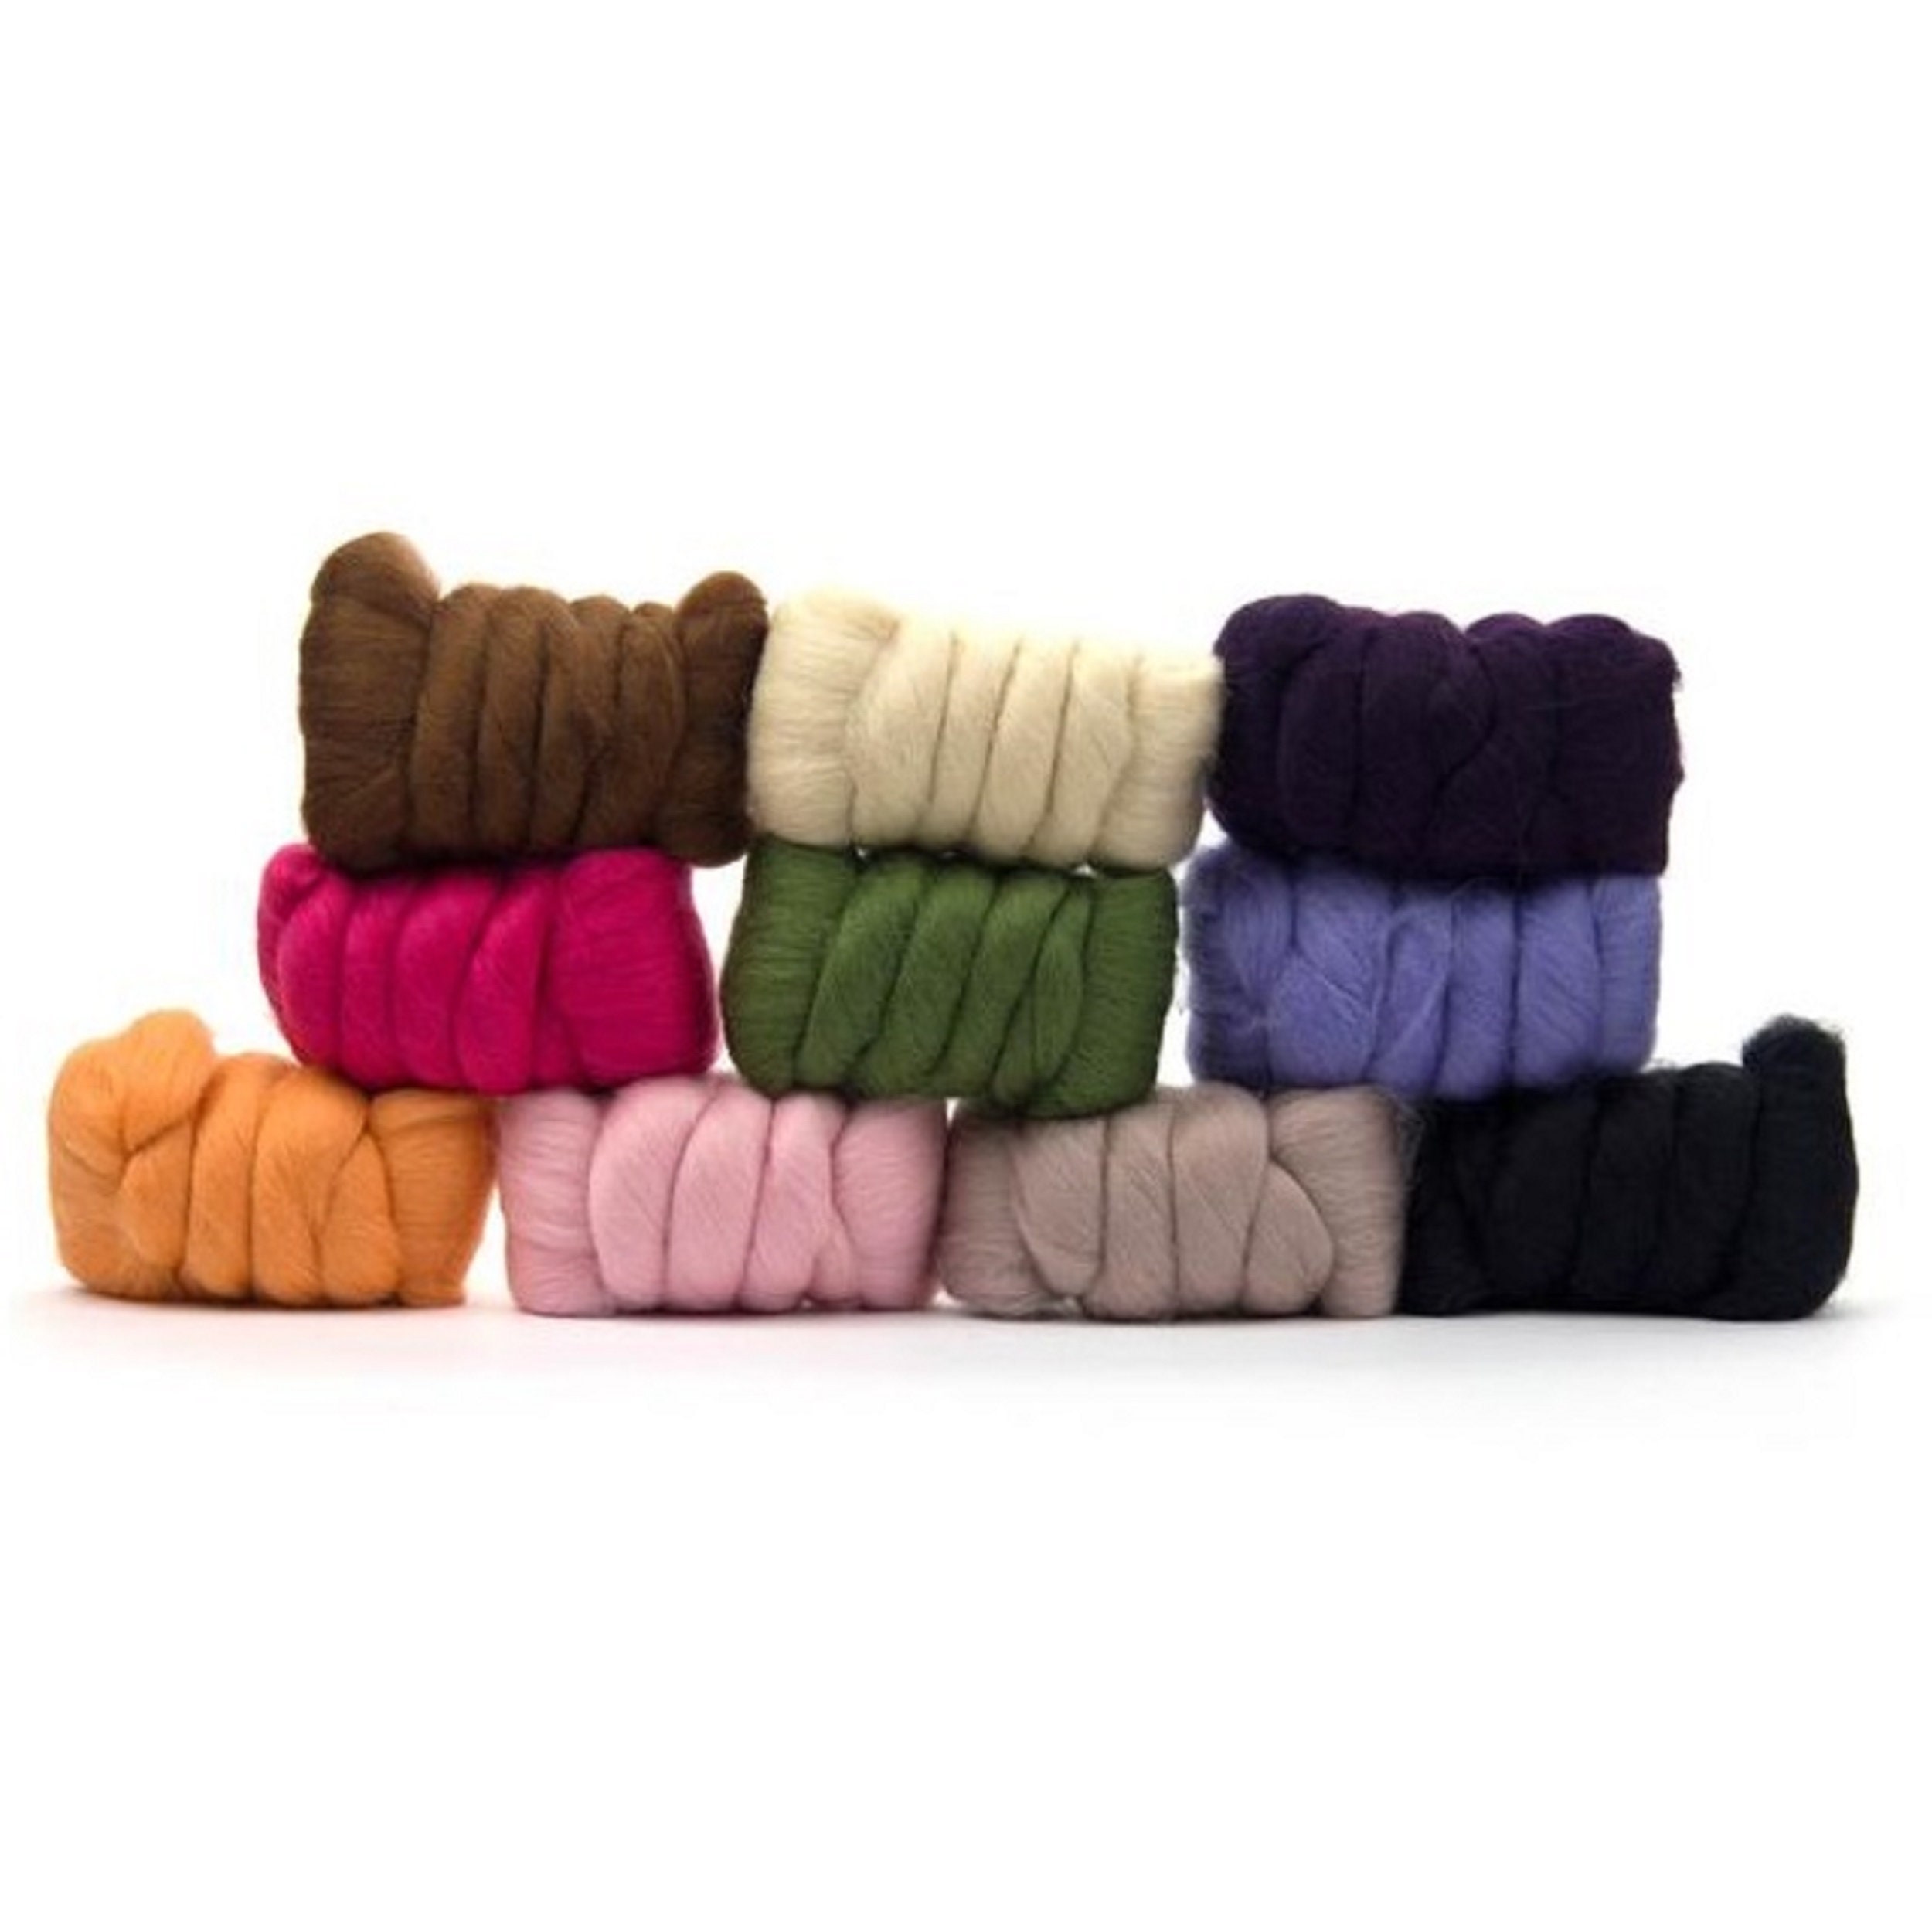 Mixed Merino Wool Variety Pack Multicolor Suprise 